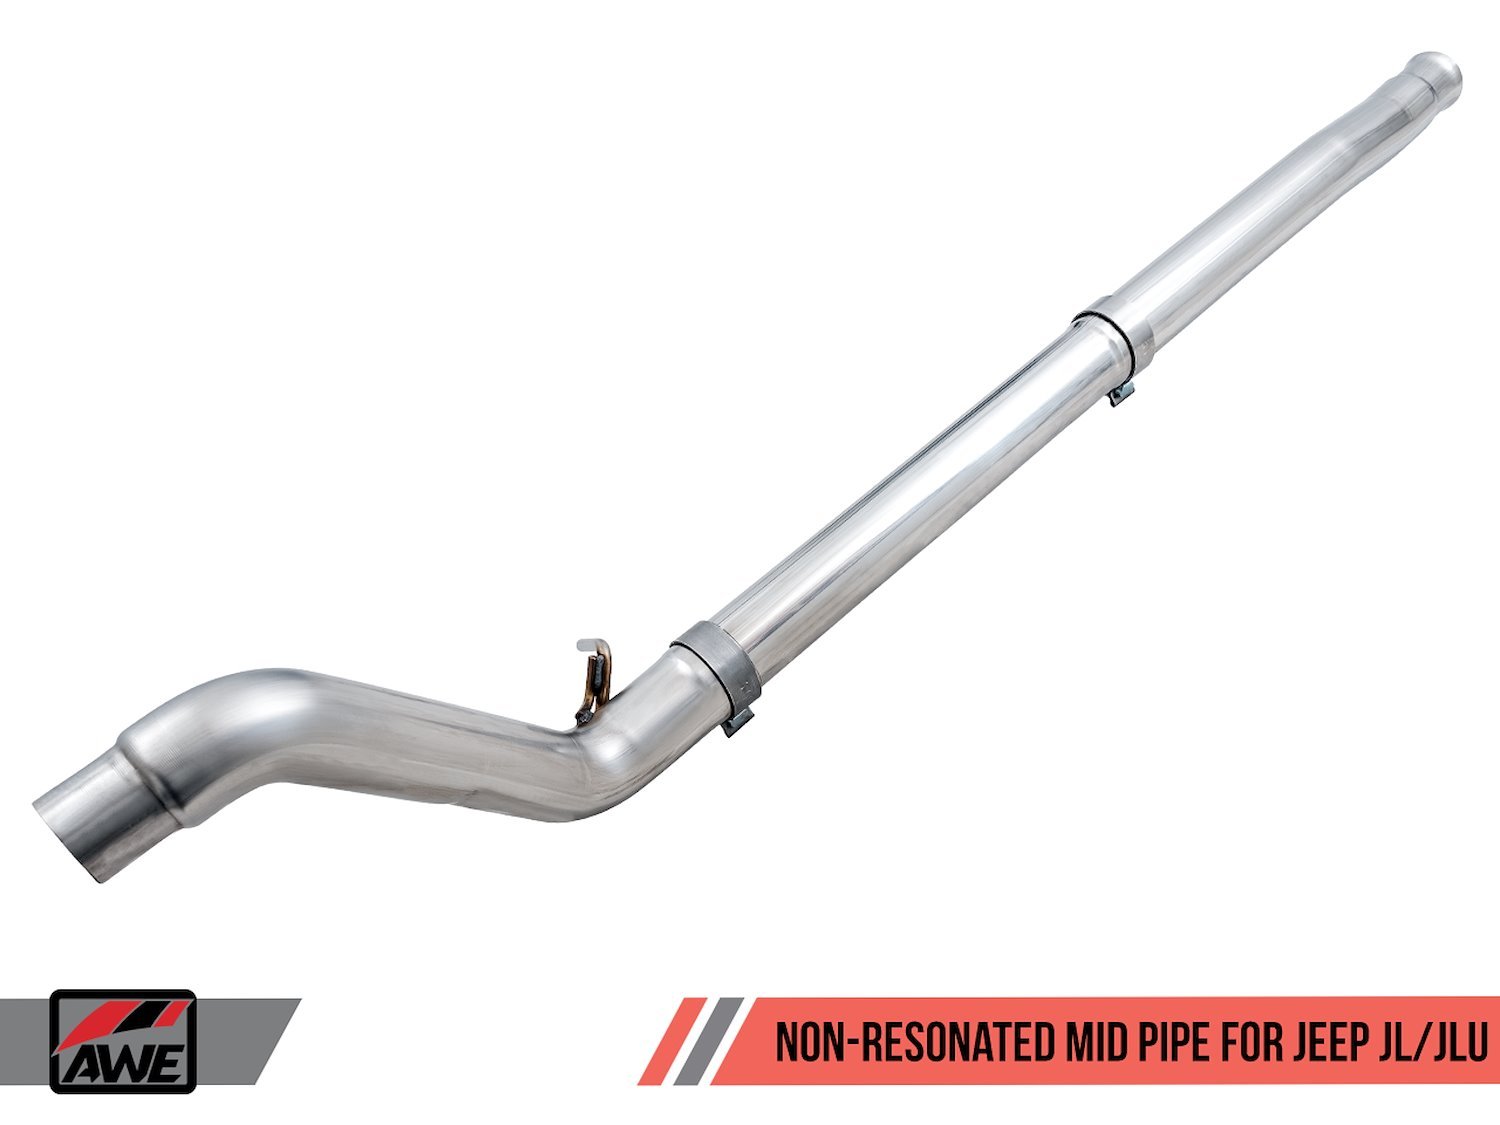 AWE Non-Resonated Mid Pipe for Jeep JL/JLU 3.6L